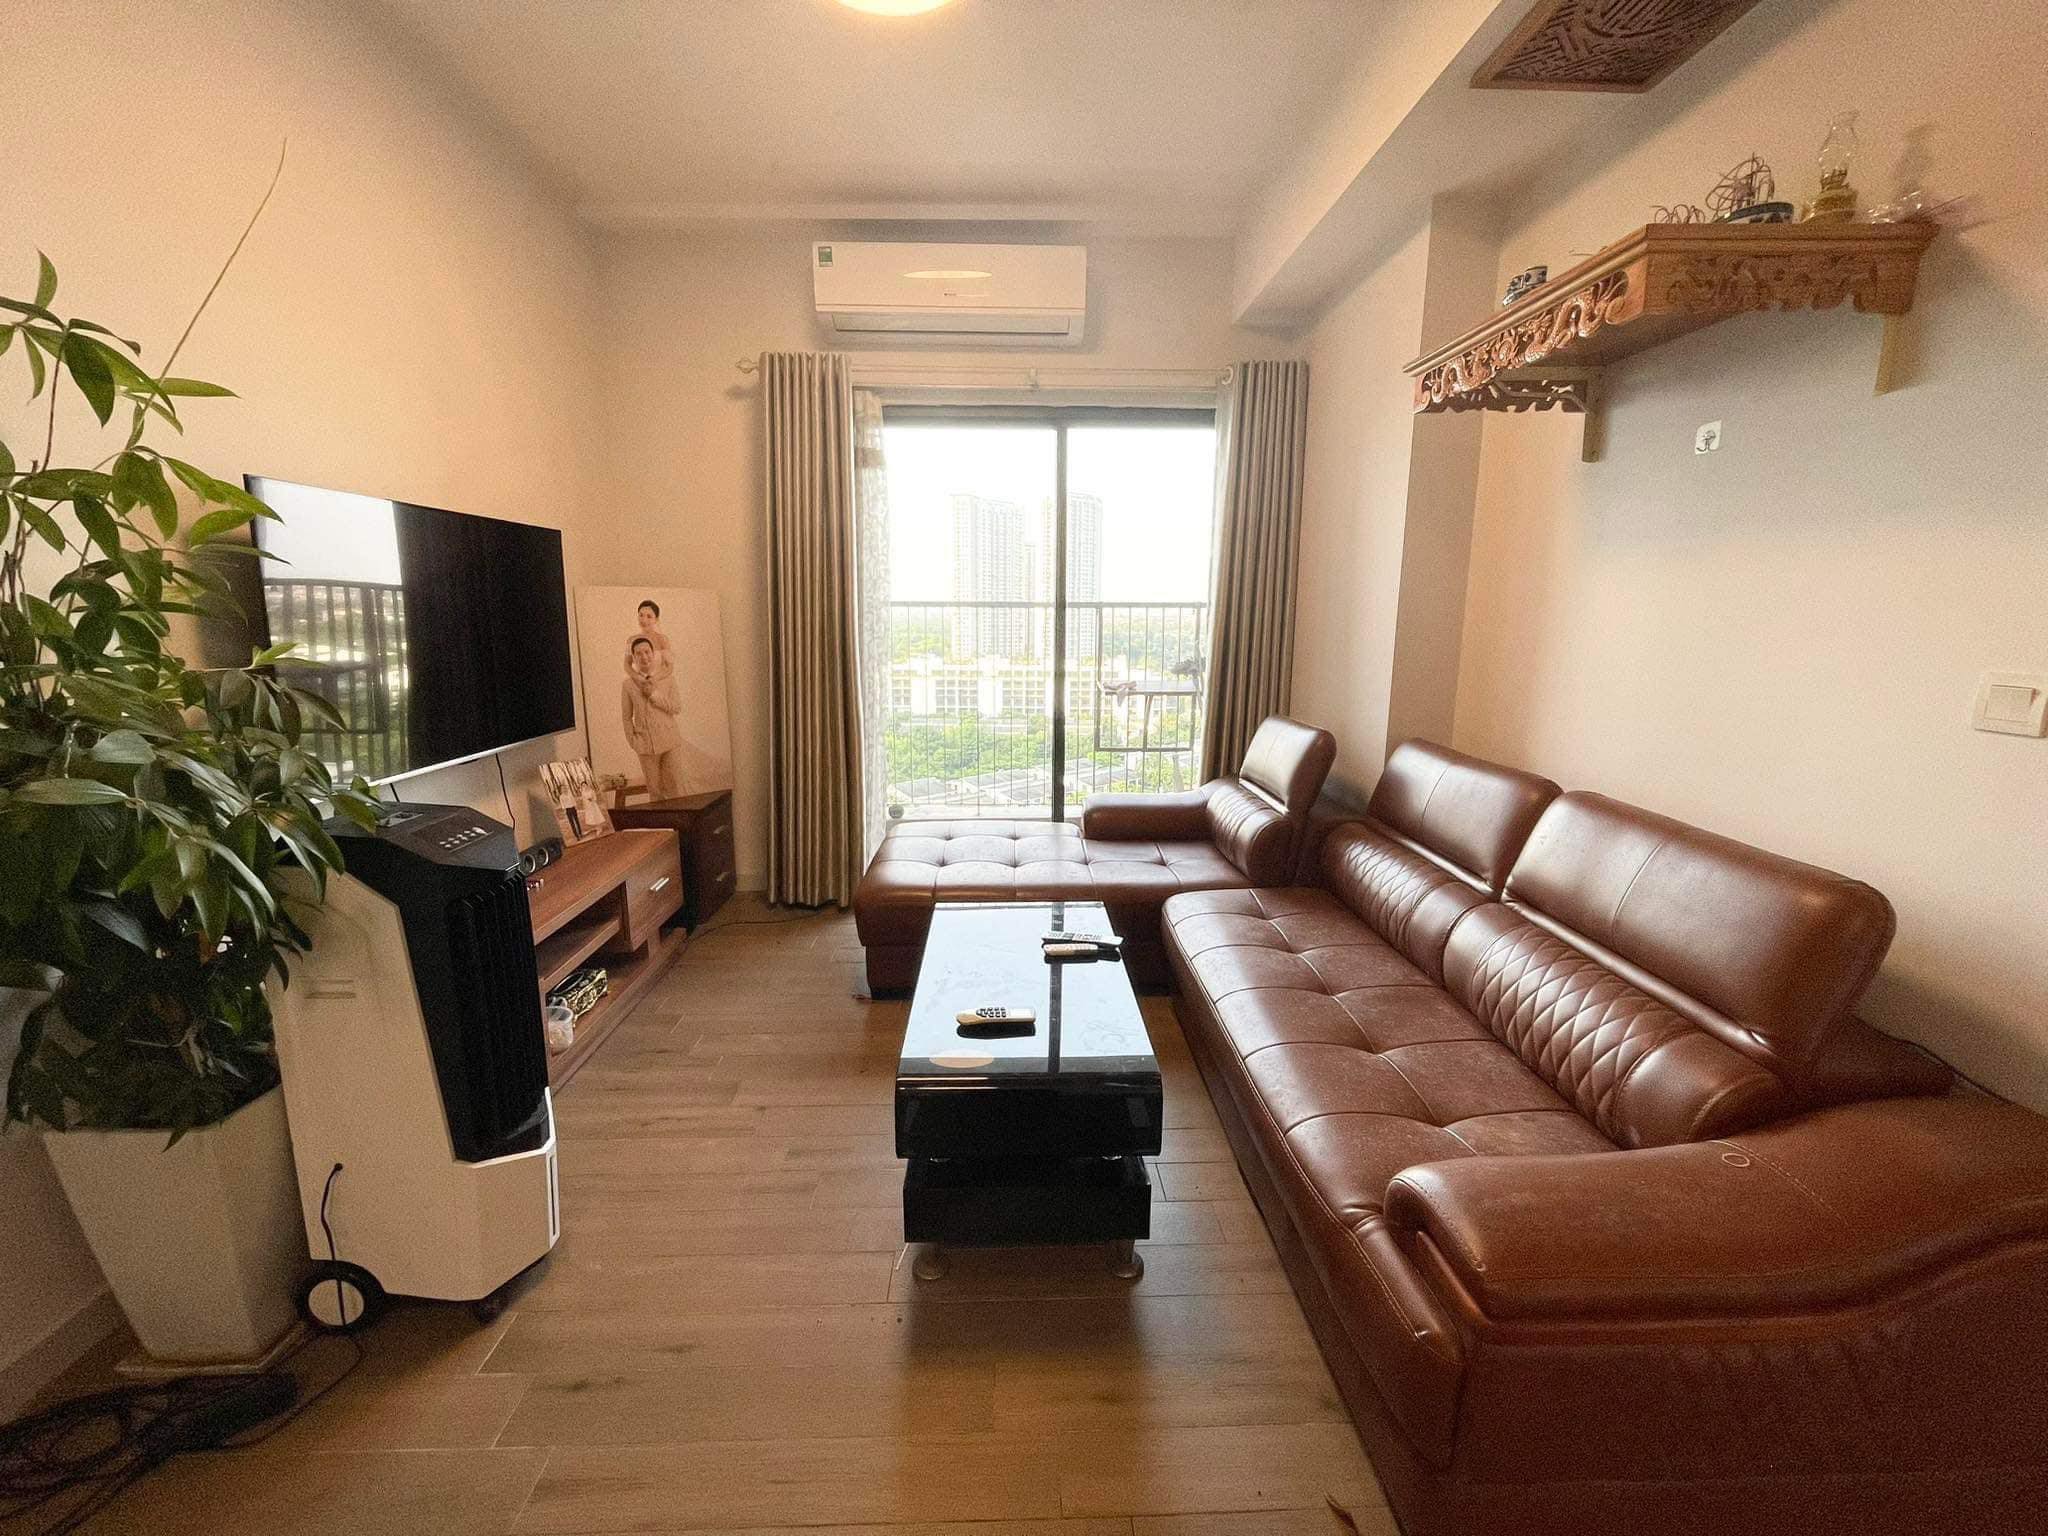 3 bedrooms rental apartment in D tower , Westbay